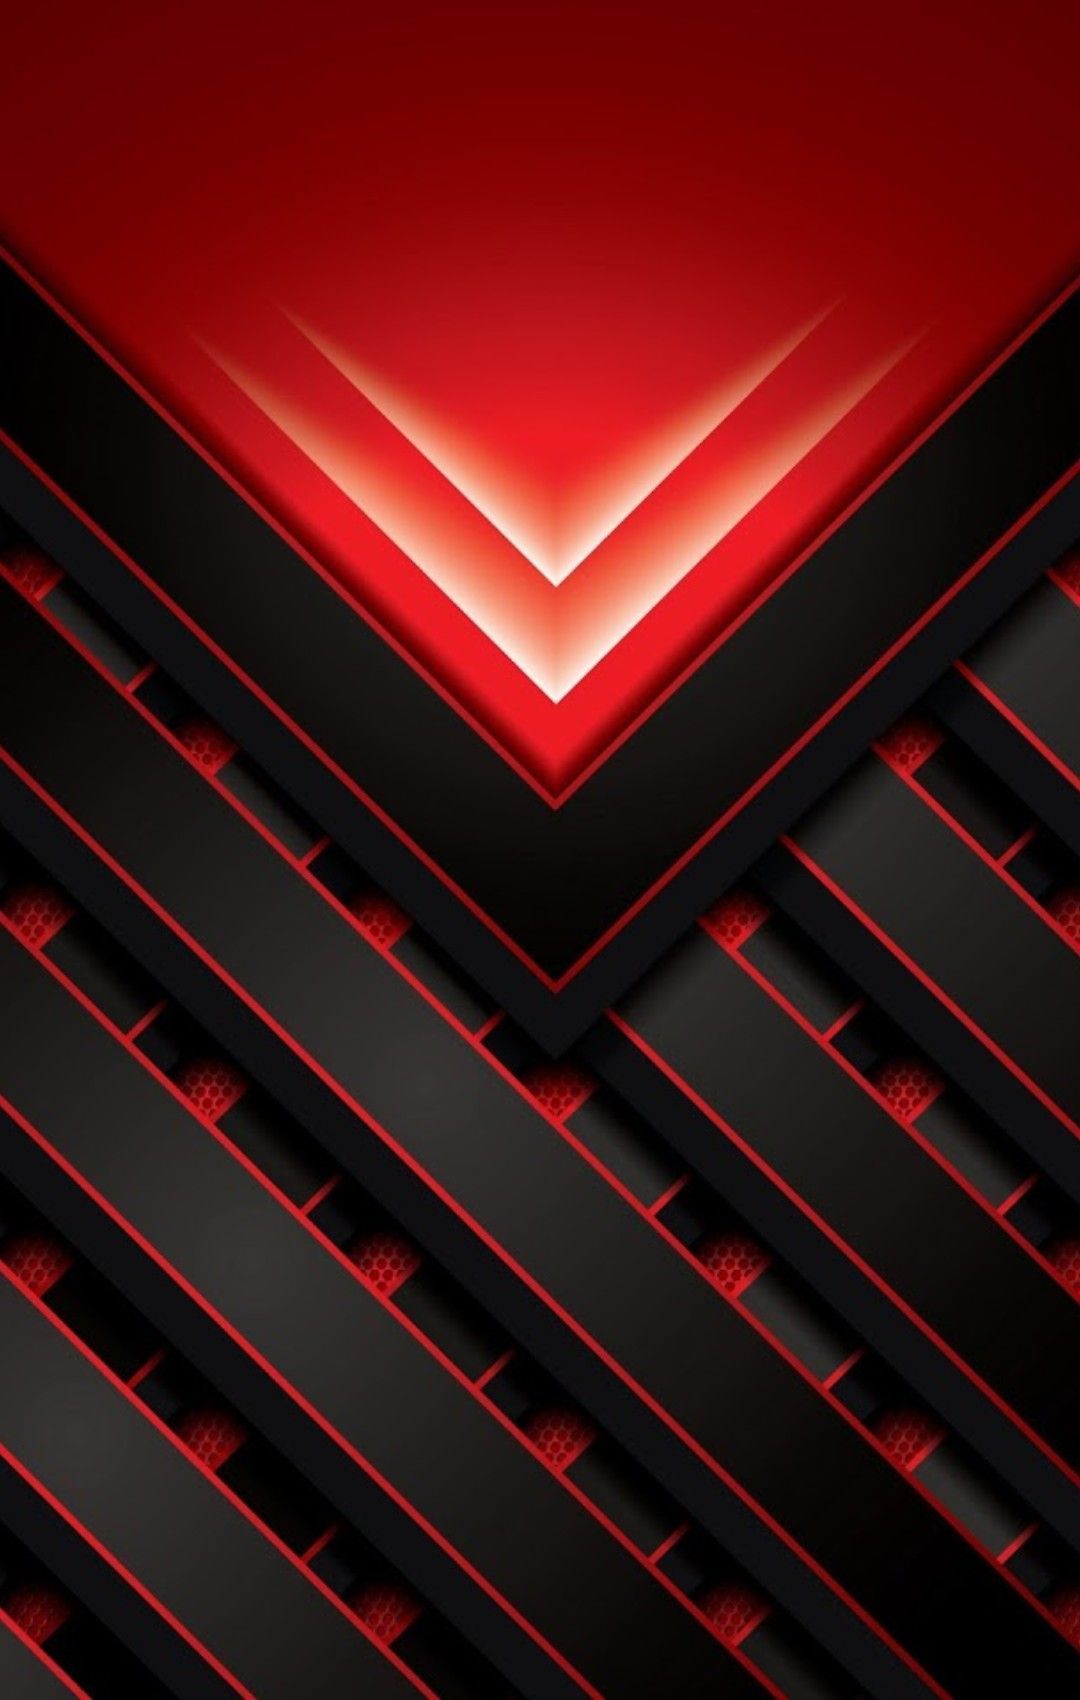 Red and Black Geometric Wallpaper. Abstract iphone